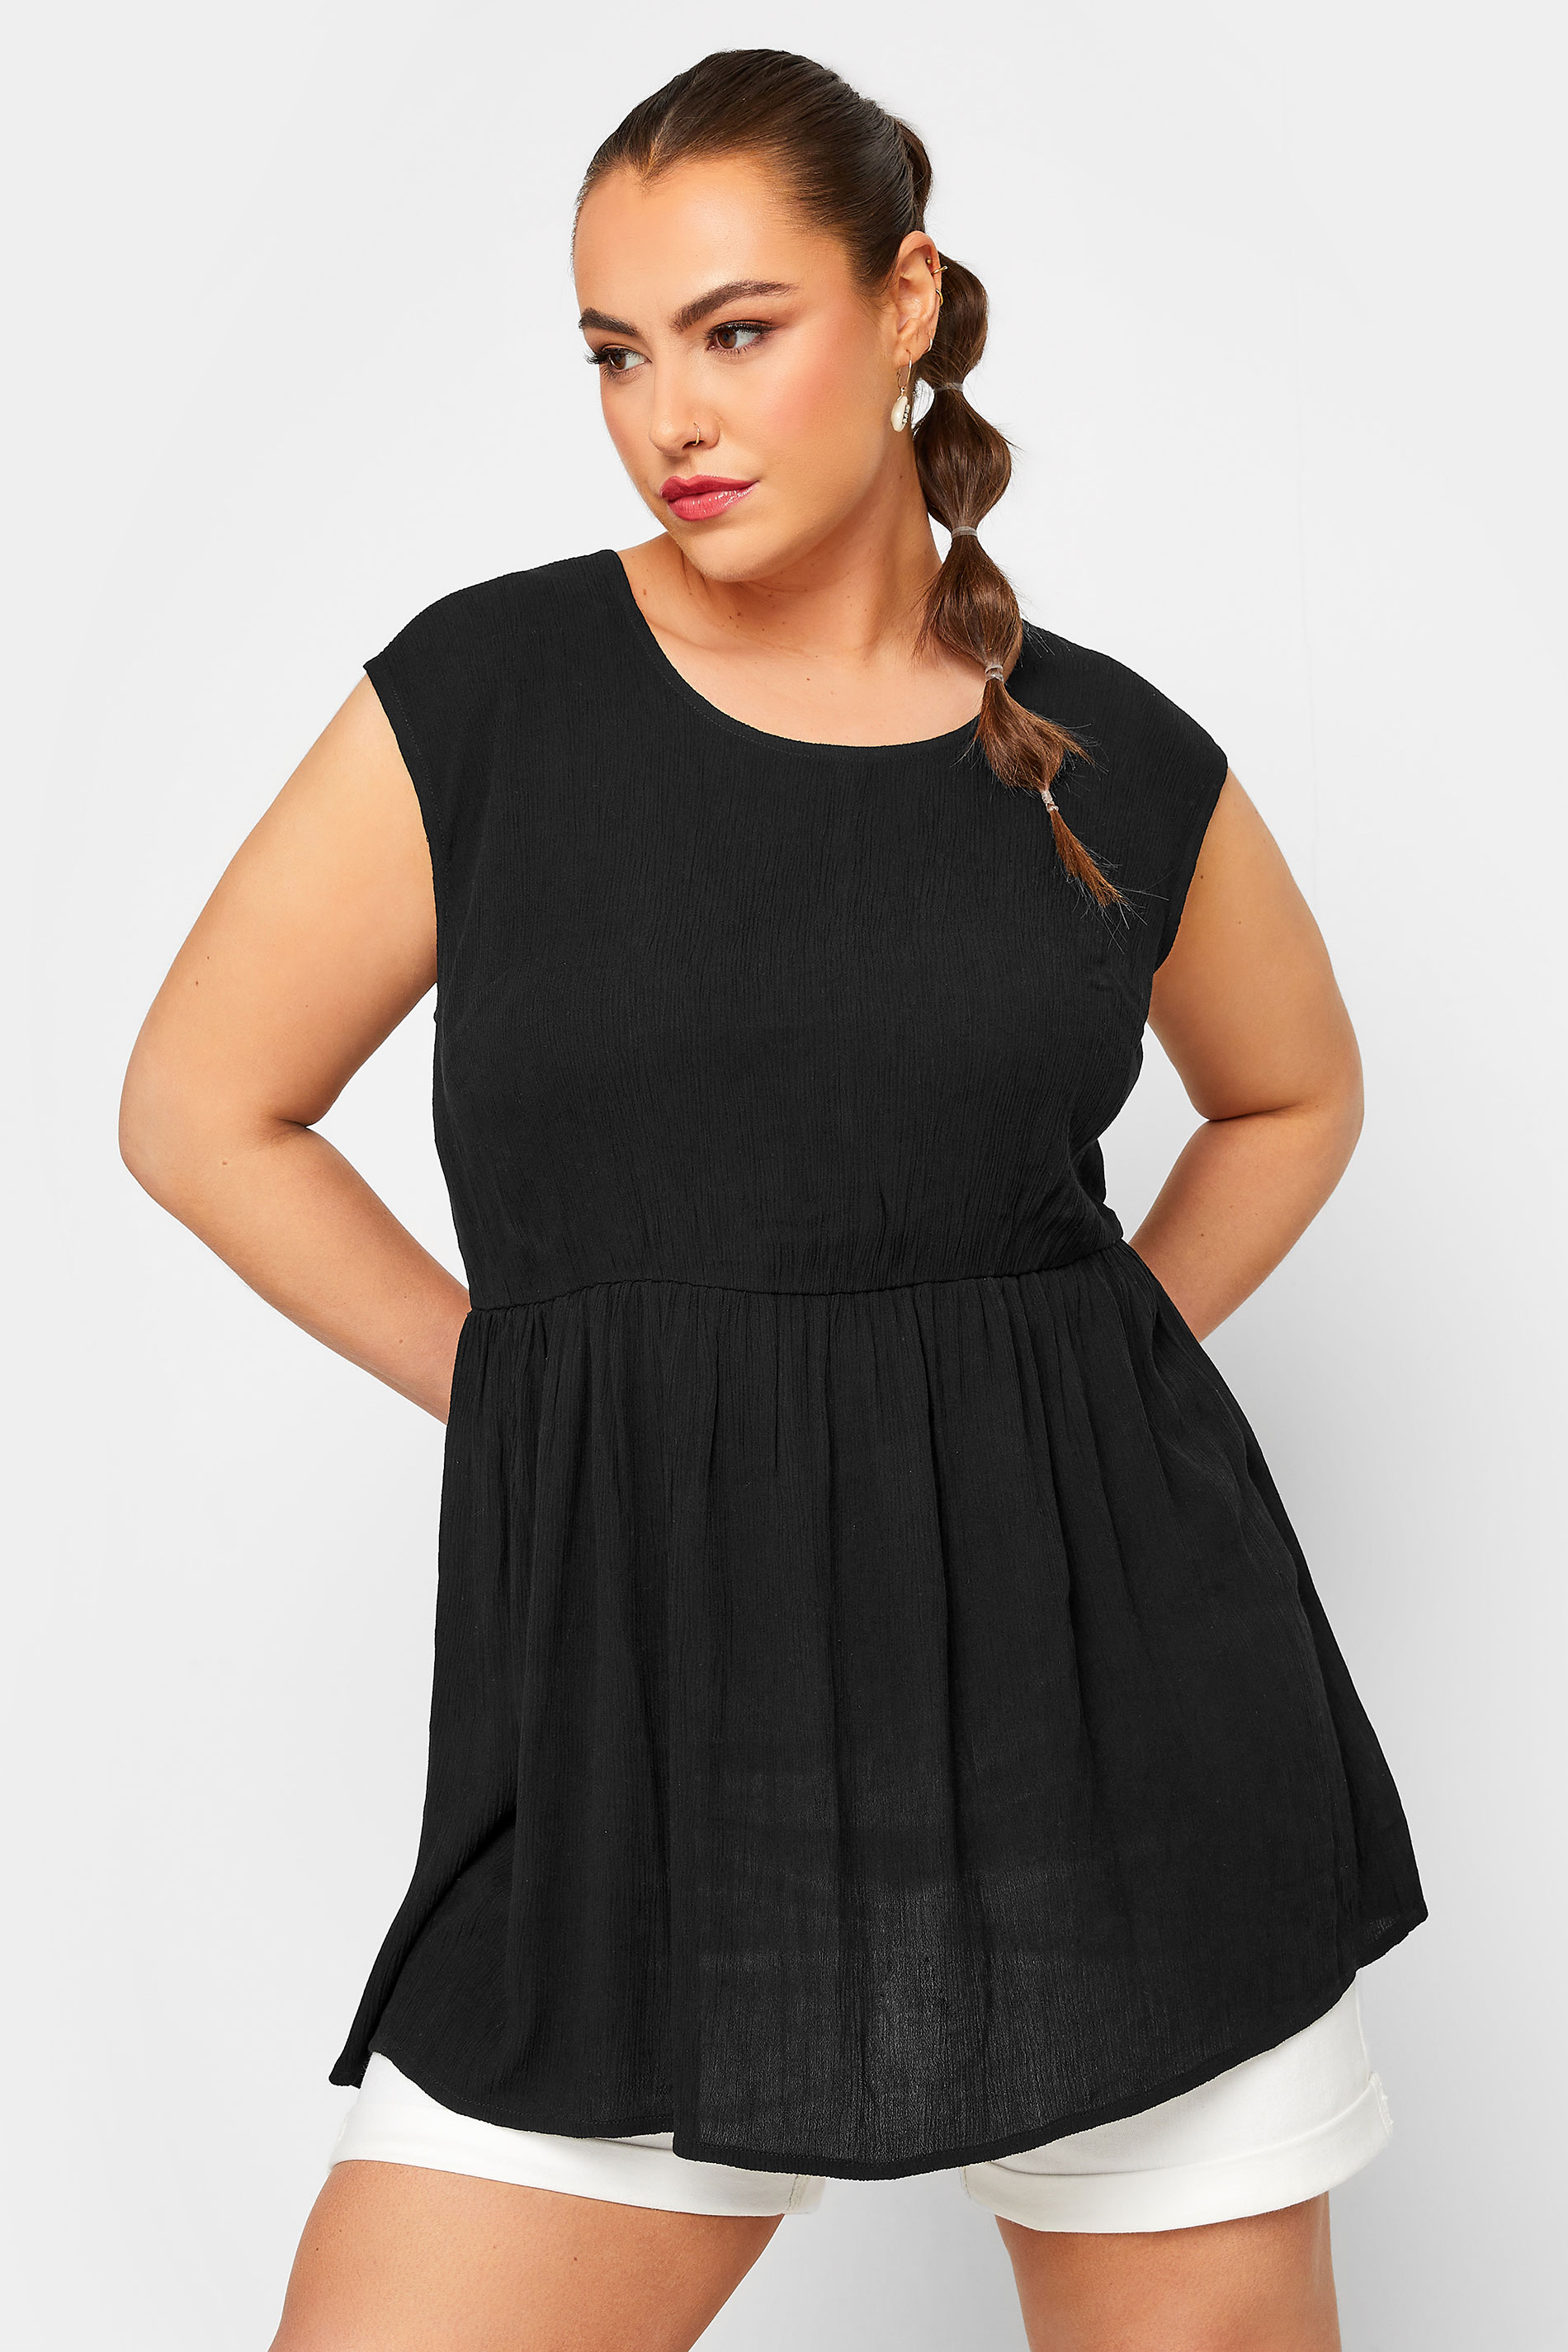 LIMITED COLLECTION Plus Size Black Crinkle Boxy Peplum Vest Top | Yours Clothing 1